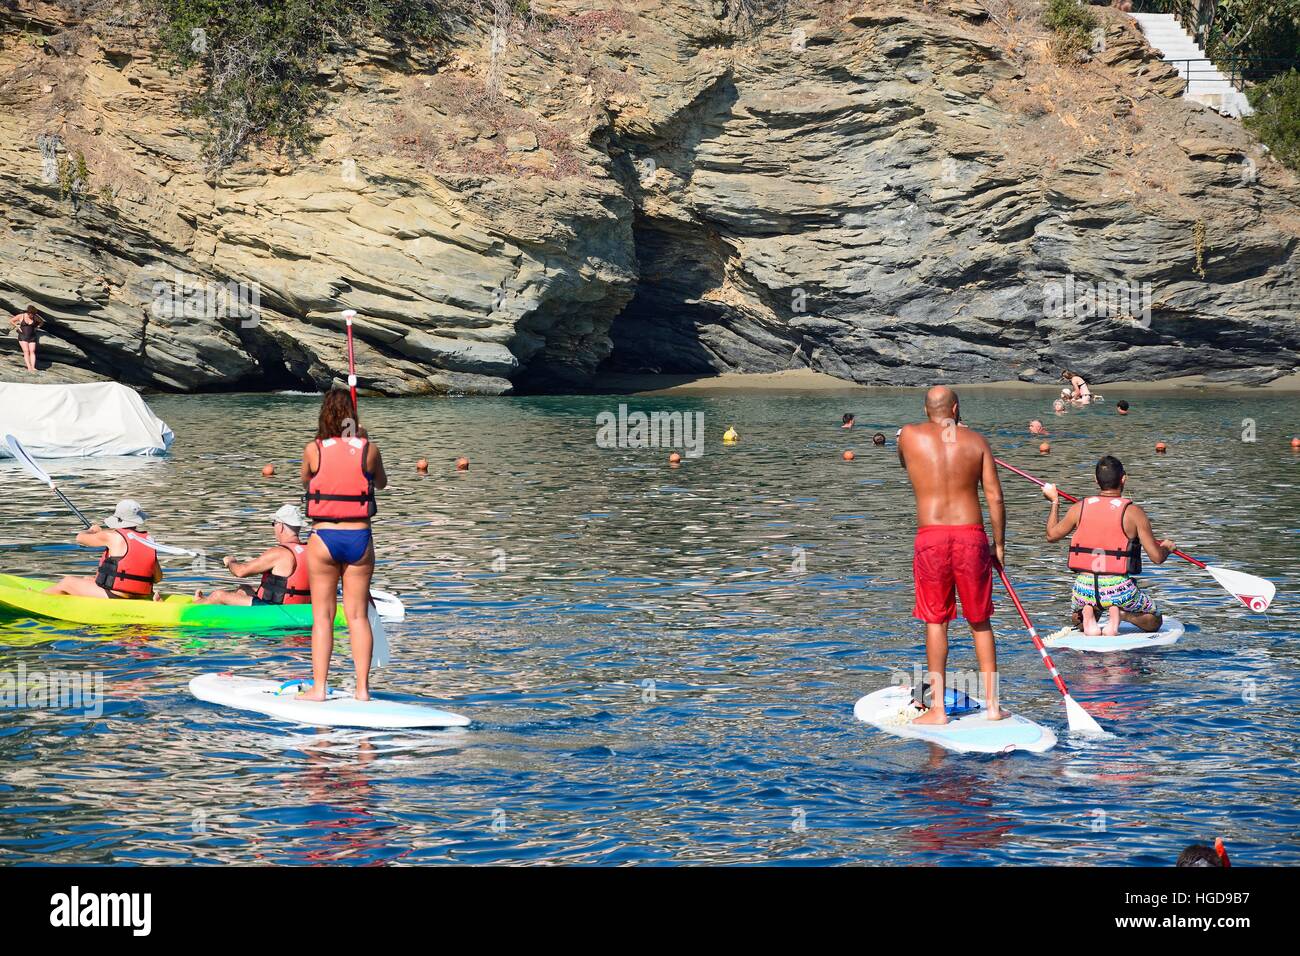 Holidaymakers on paddle boards with a small beach and cave to the rear, Bali, Crete, Greece, Europe. Stock Photo